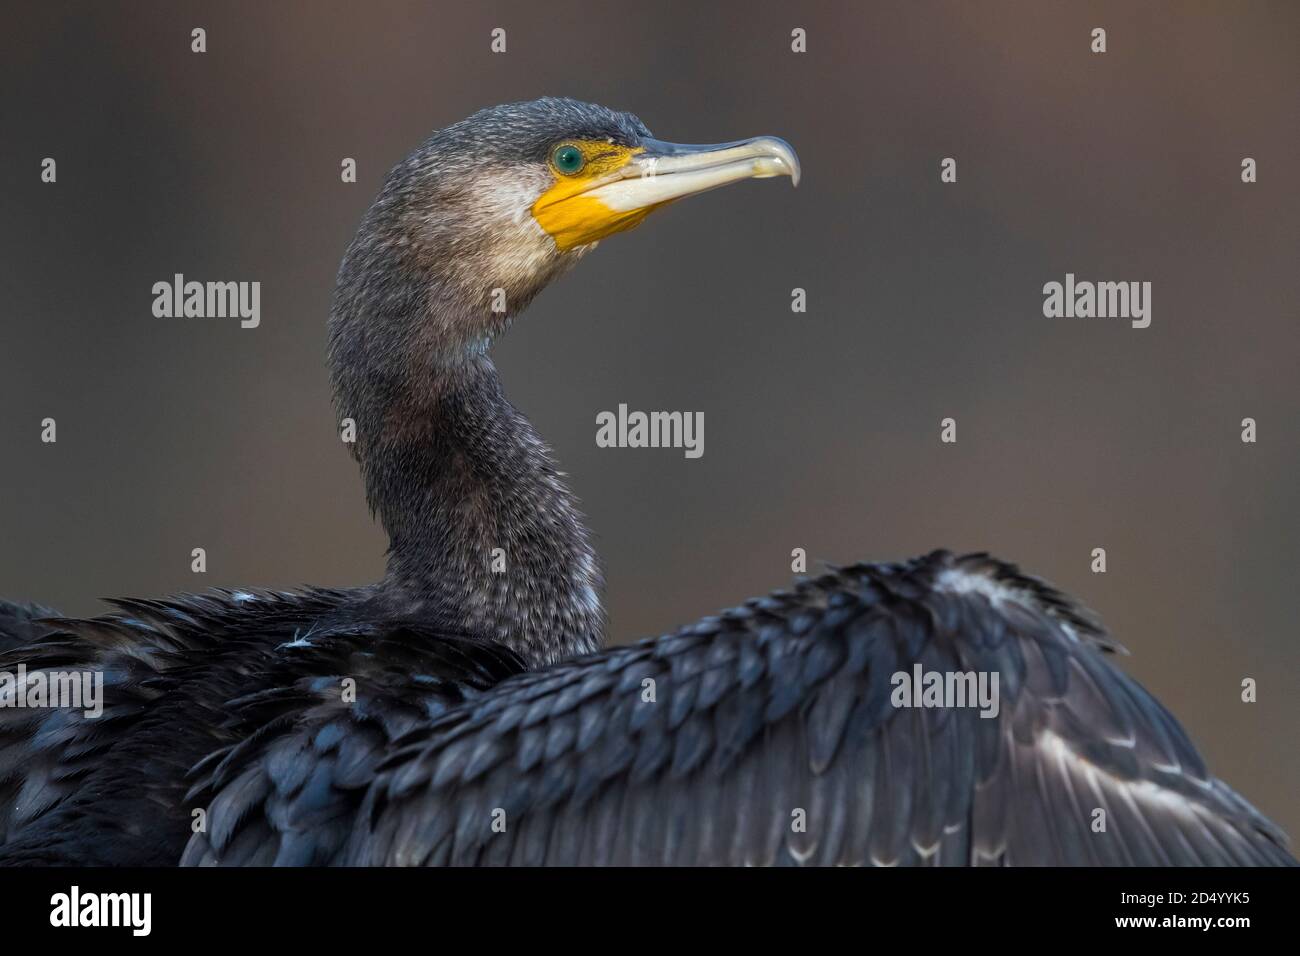 Chinese great cormorant (Phalacrocorax carbo sinensis, Phalacrocorax sinensis), with wings streched out, Italy, Piana fiorentina Stock Photo